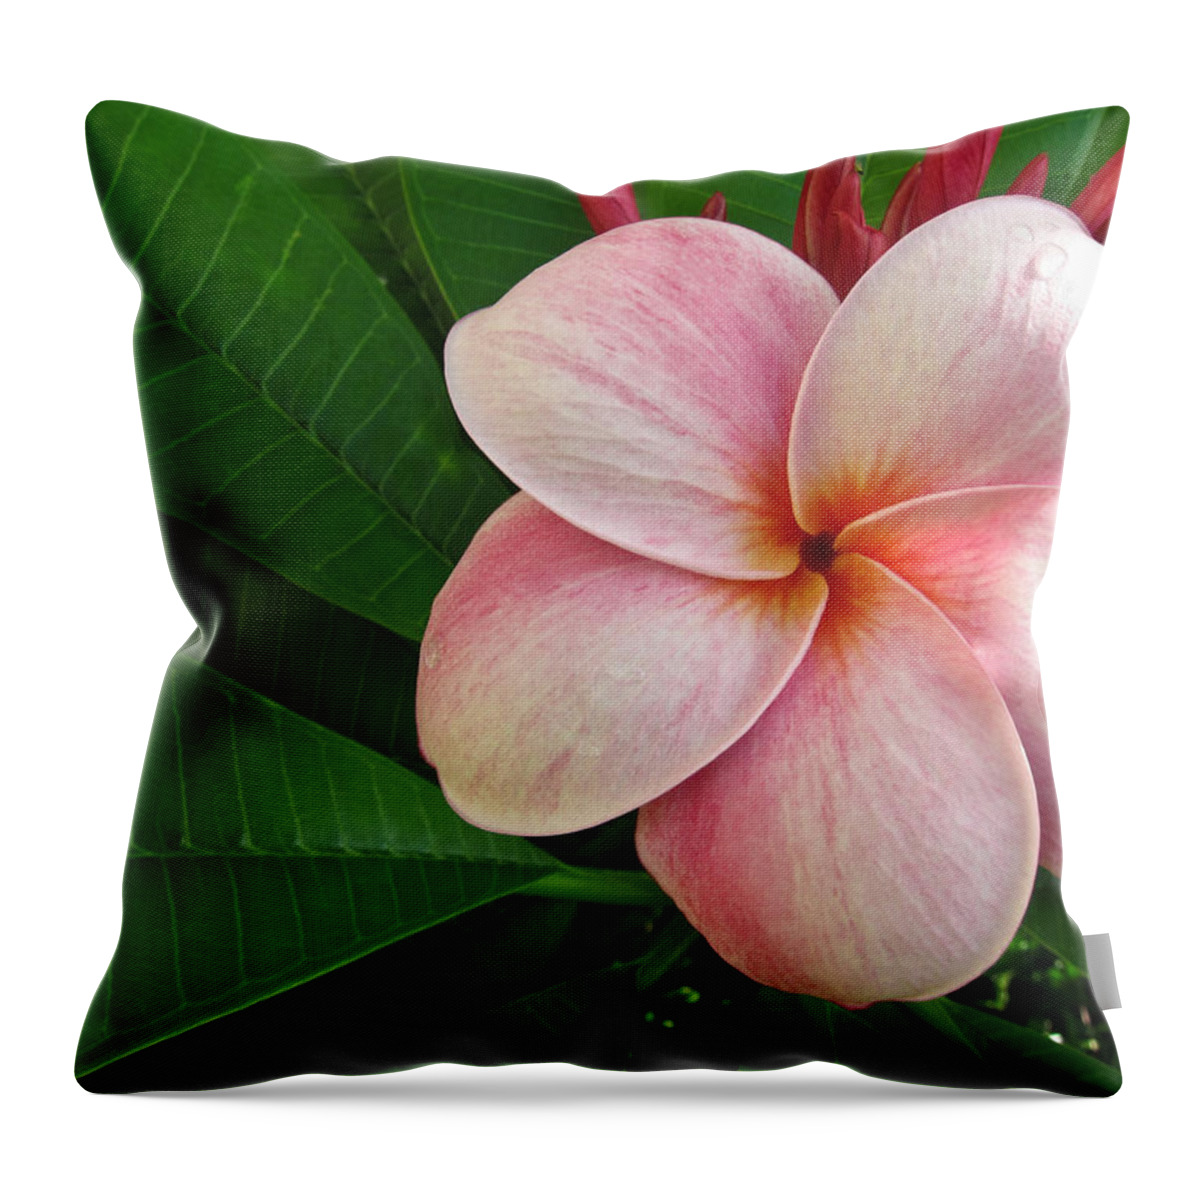 Plumeria Throw Pillow featuring the photograph Pink Plumeria by Shane Kelly